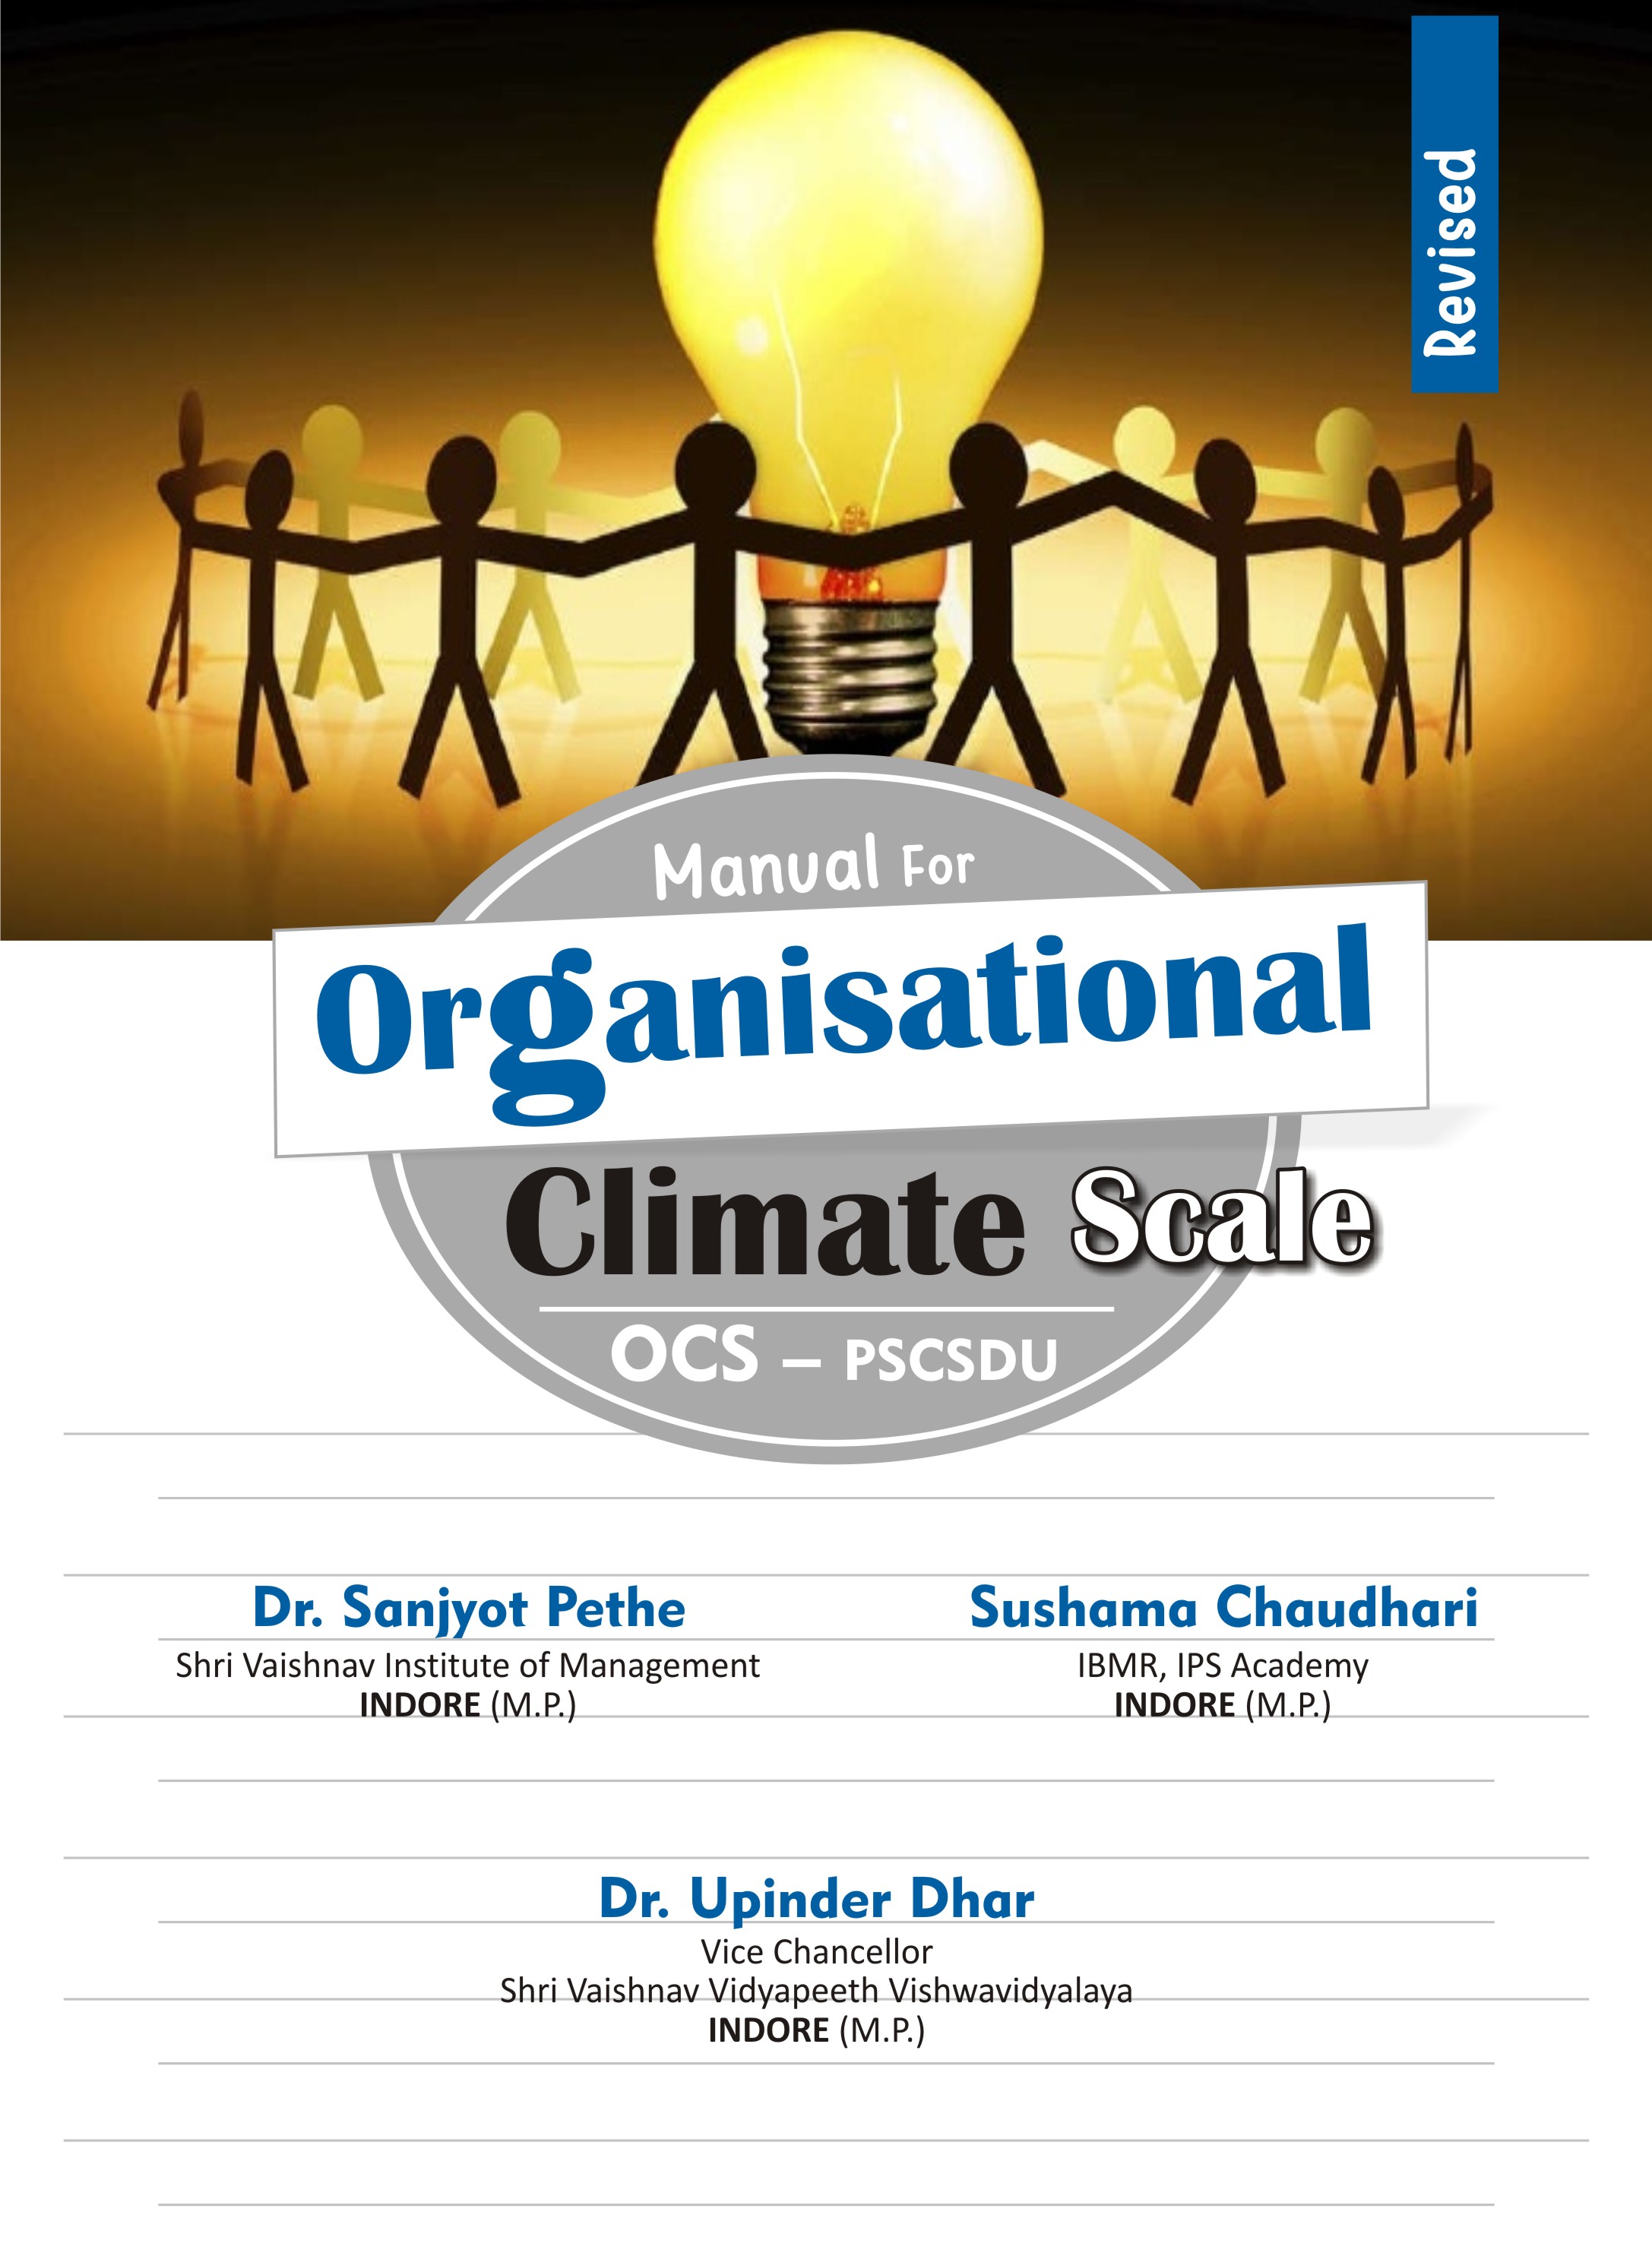 ORGANISATIONAL-CLIMATE-SCALE